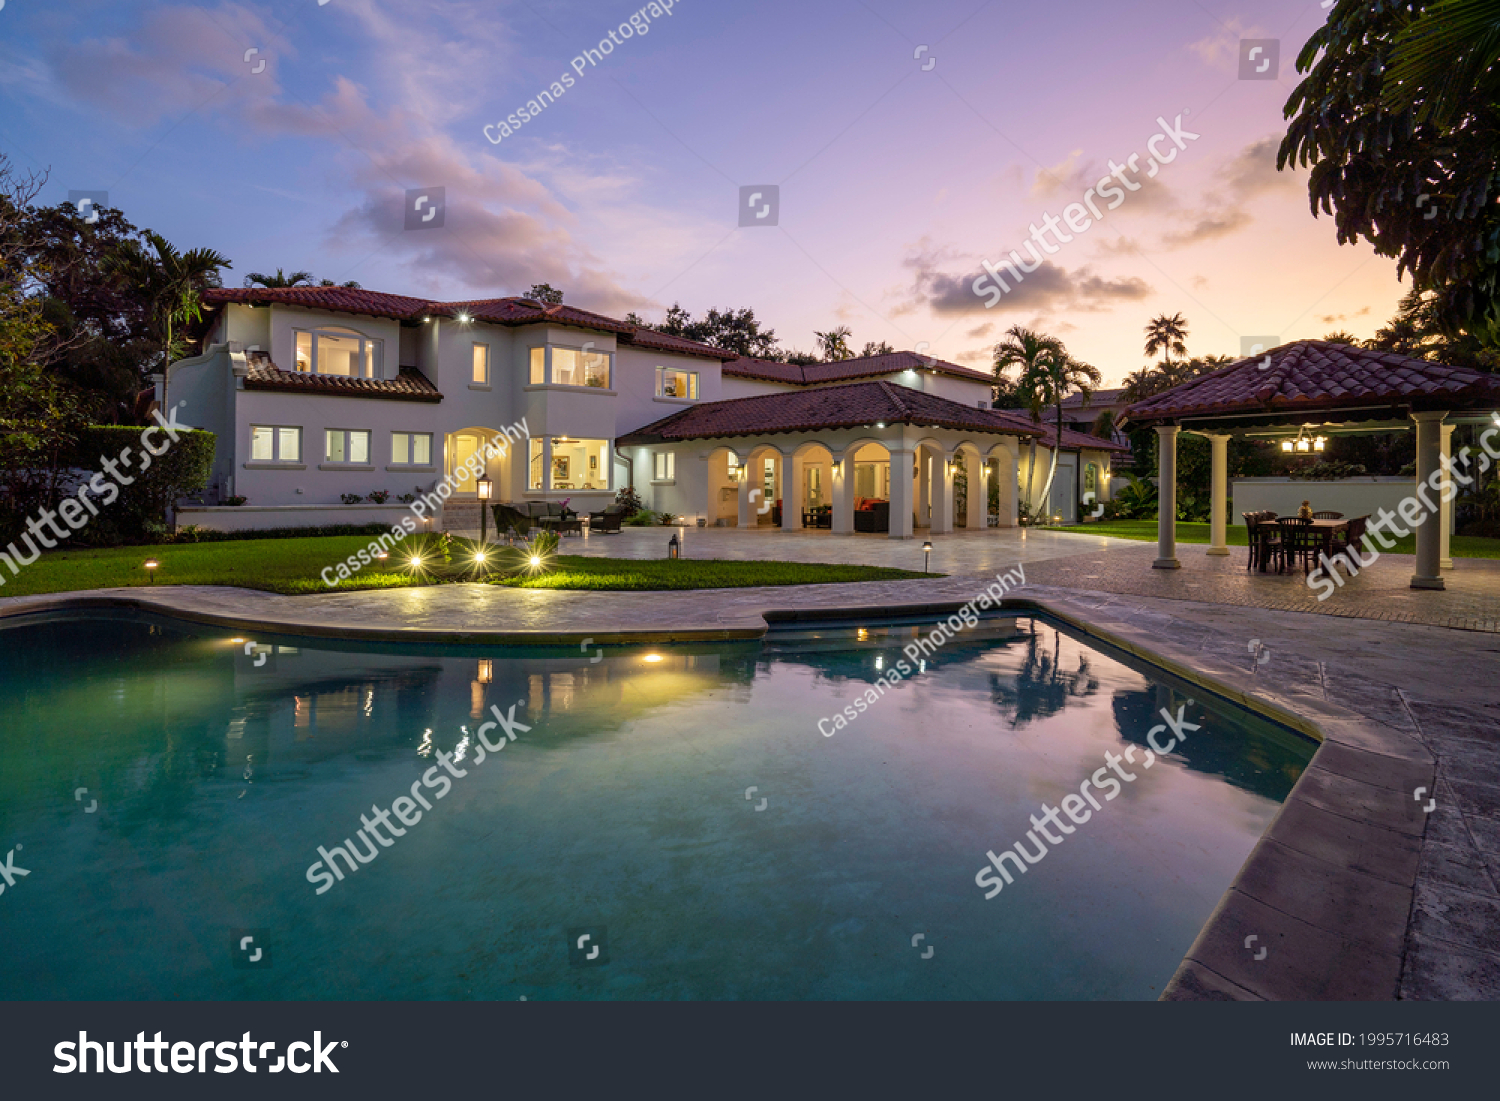 Spanish mansion, sky at dusk and a great pool for swimming. Miami, Florida. #1995716483